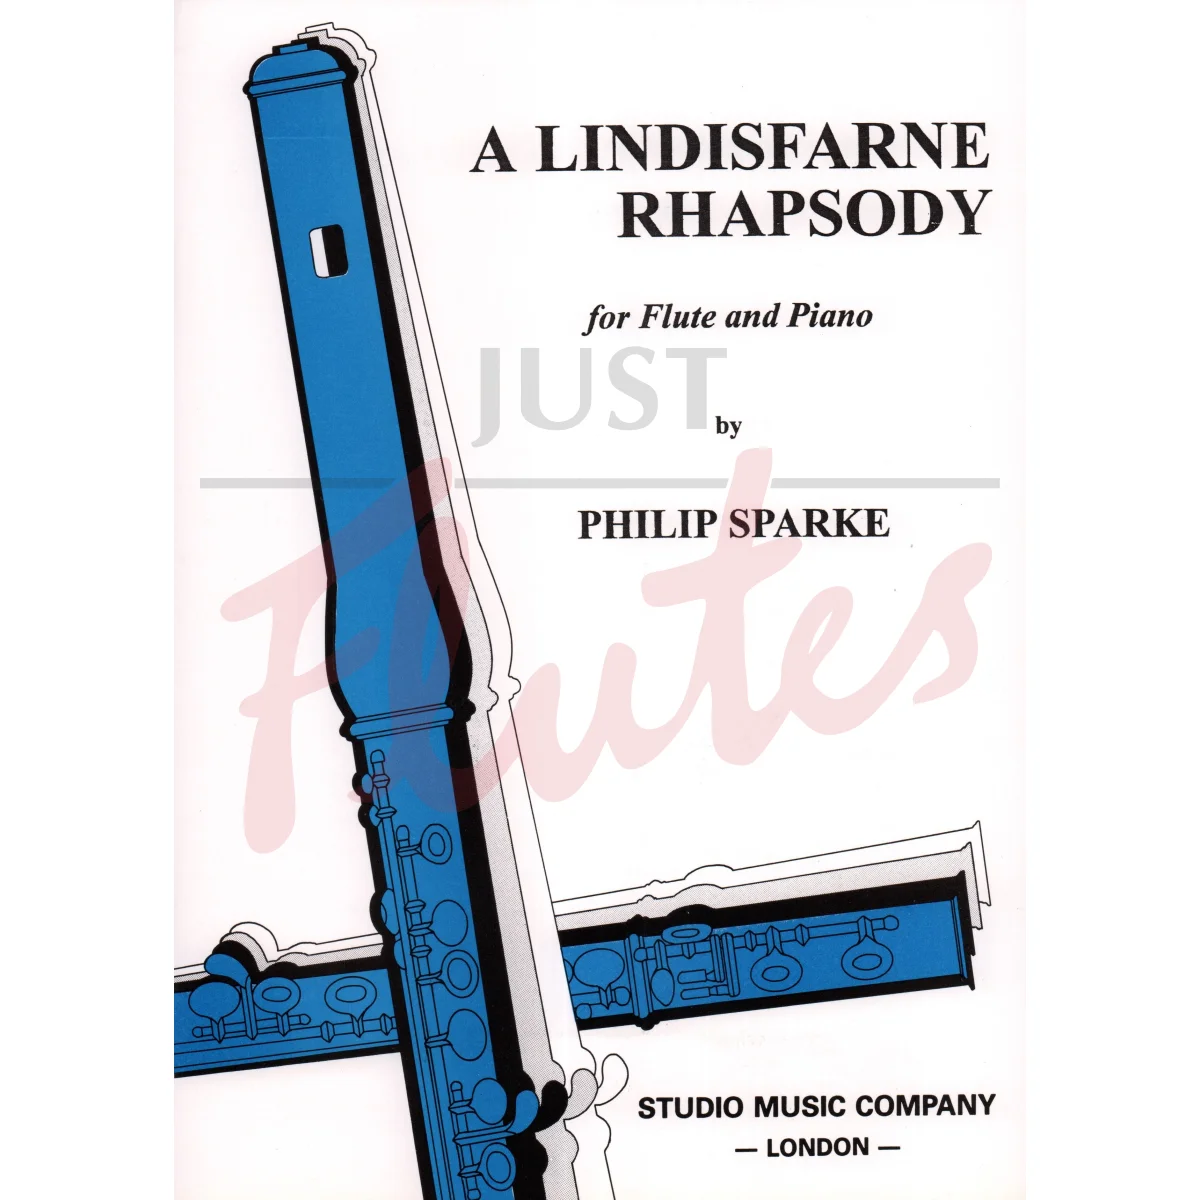 A Lindisfarne Rhapsody for Flute and Piano